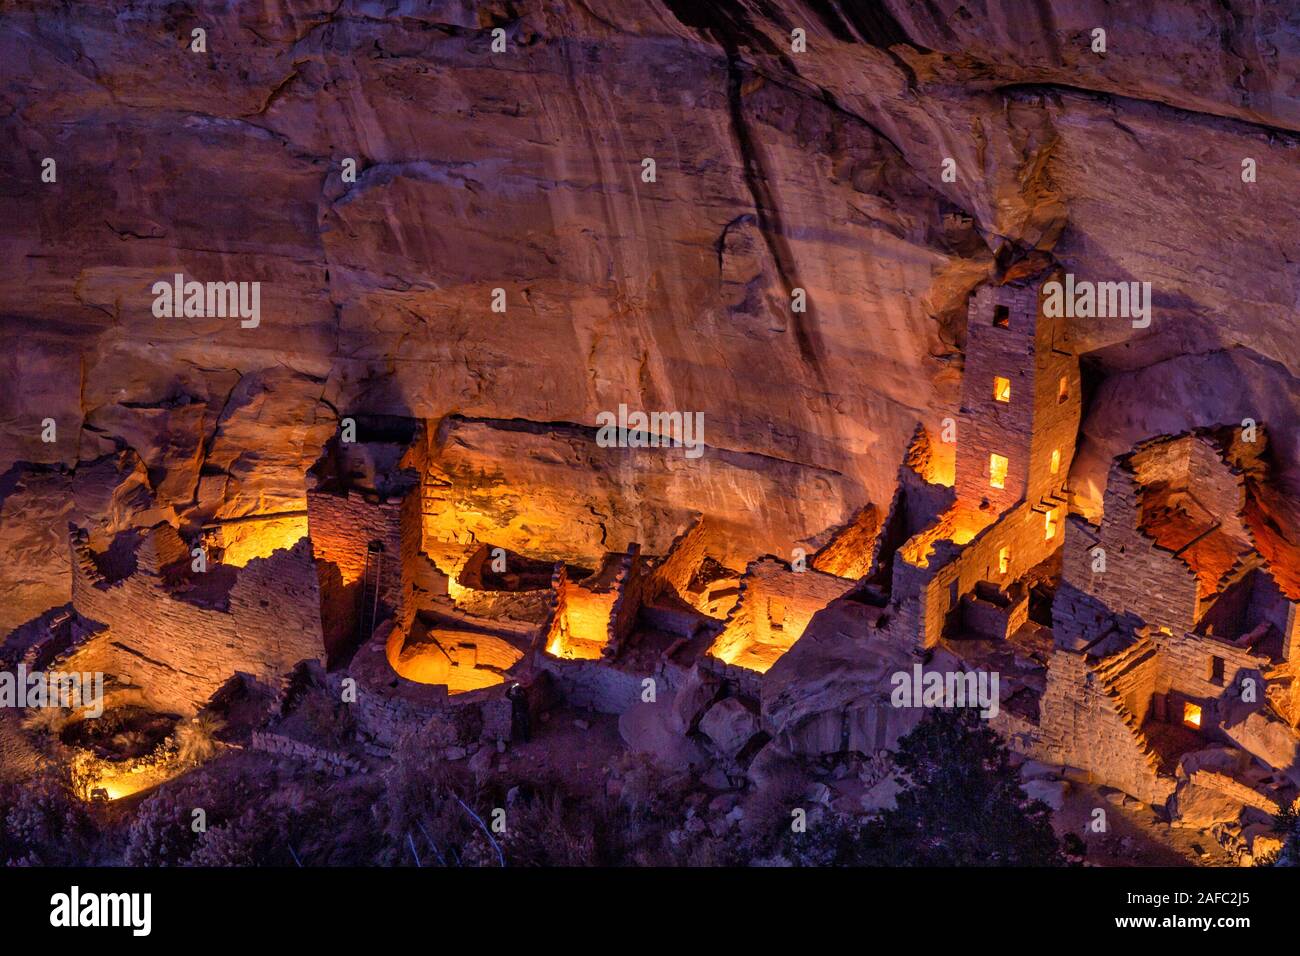 Square Tower House, the tallest cliff dwelling in Mesa Verde, illuminated for only the 2nd time during the Luminaria Festival in Mesa Verde National P Stock Photo